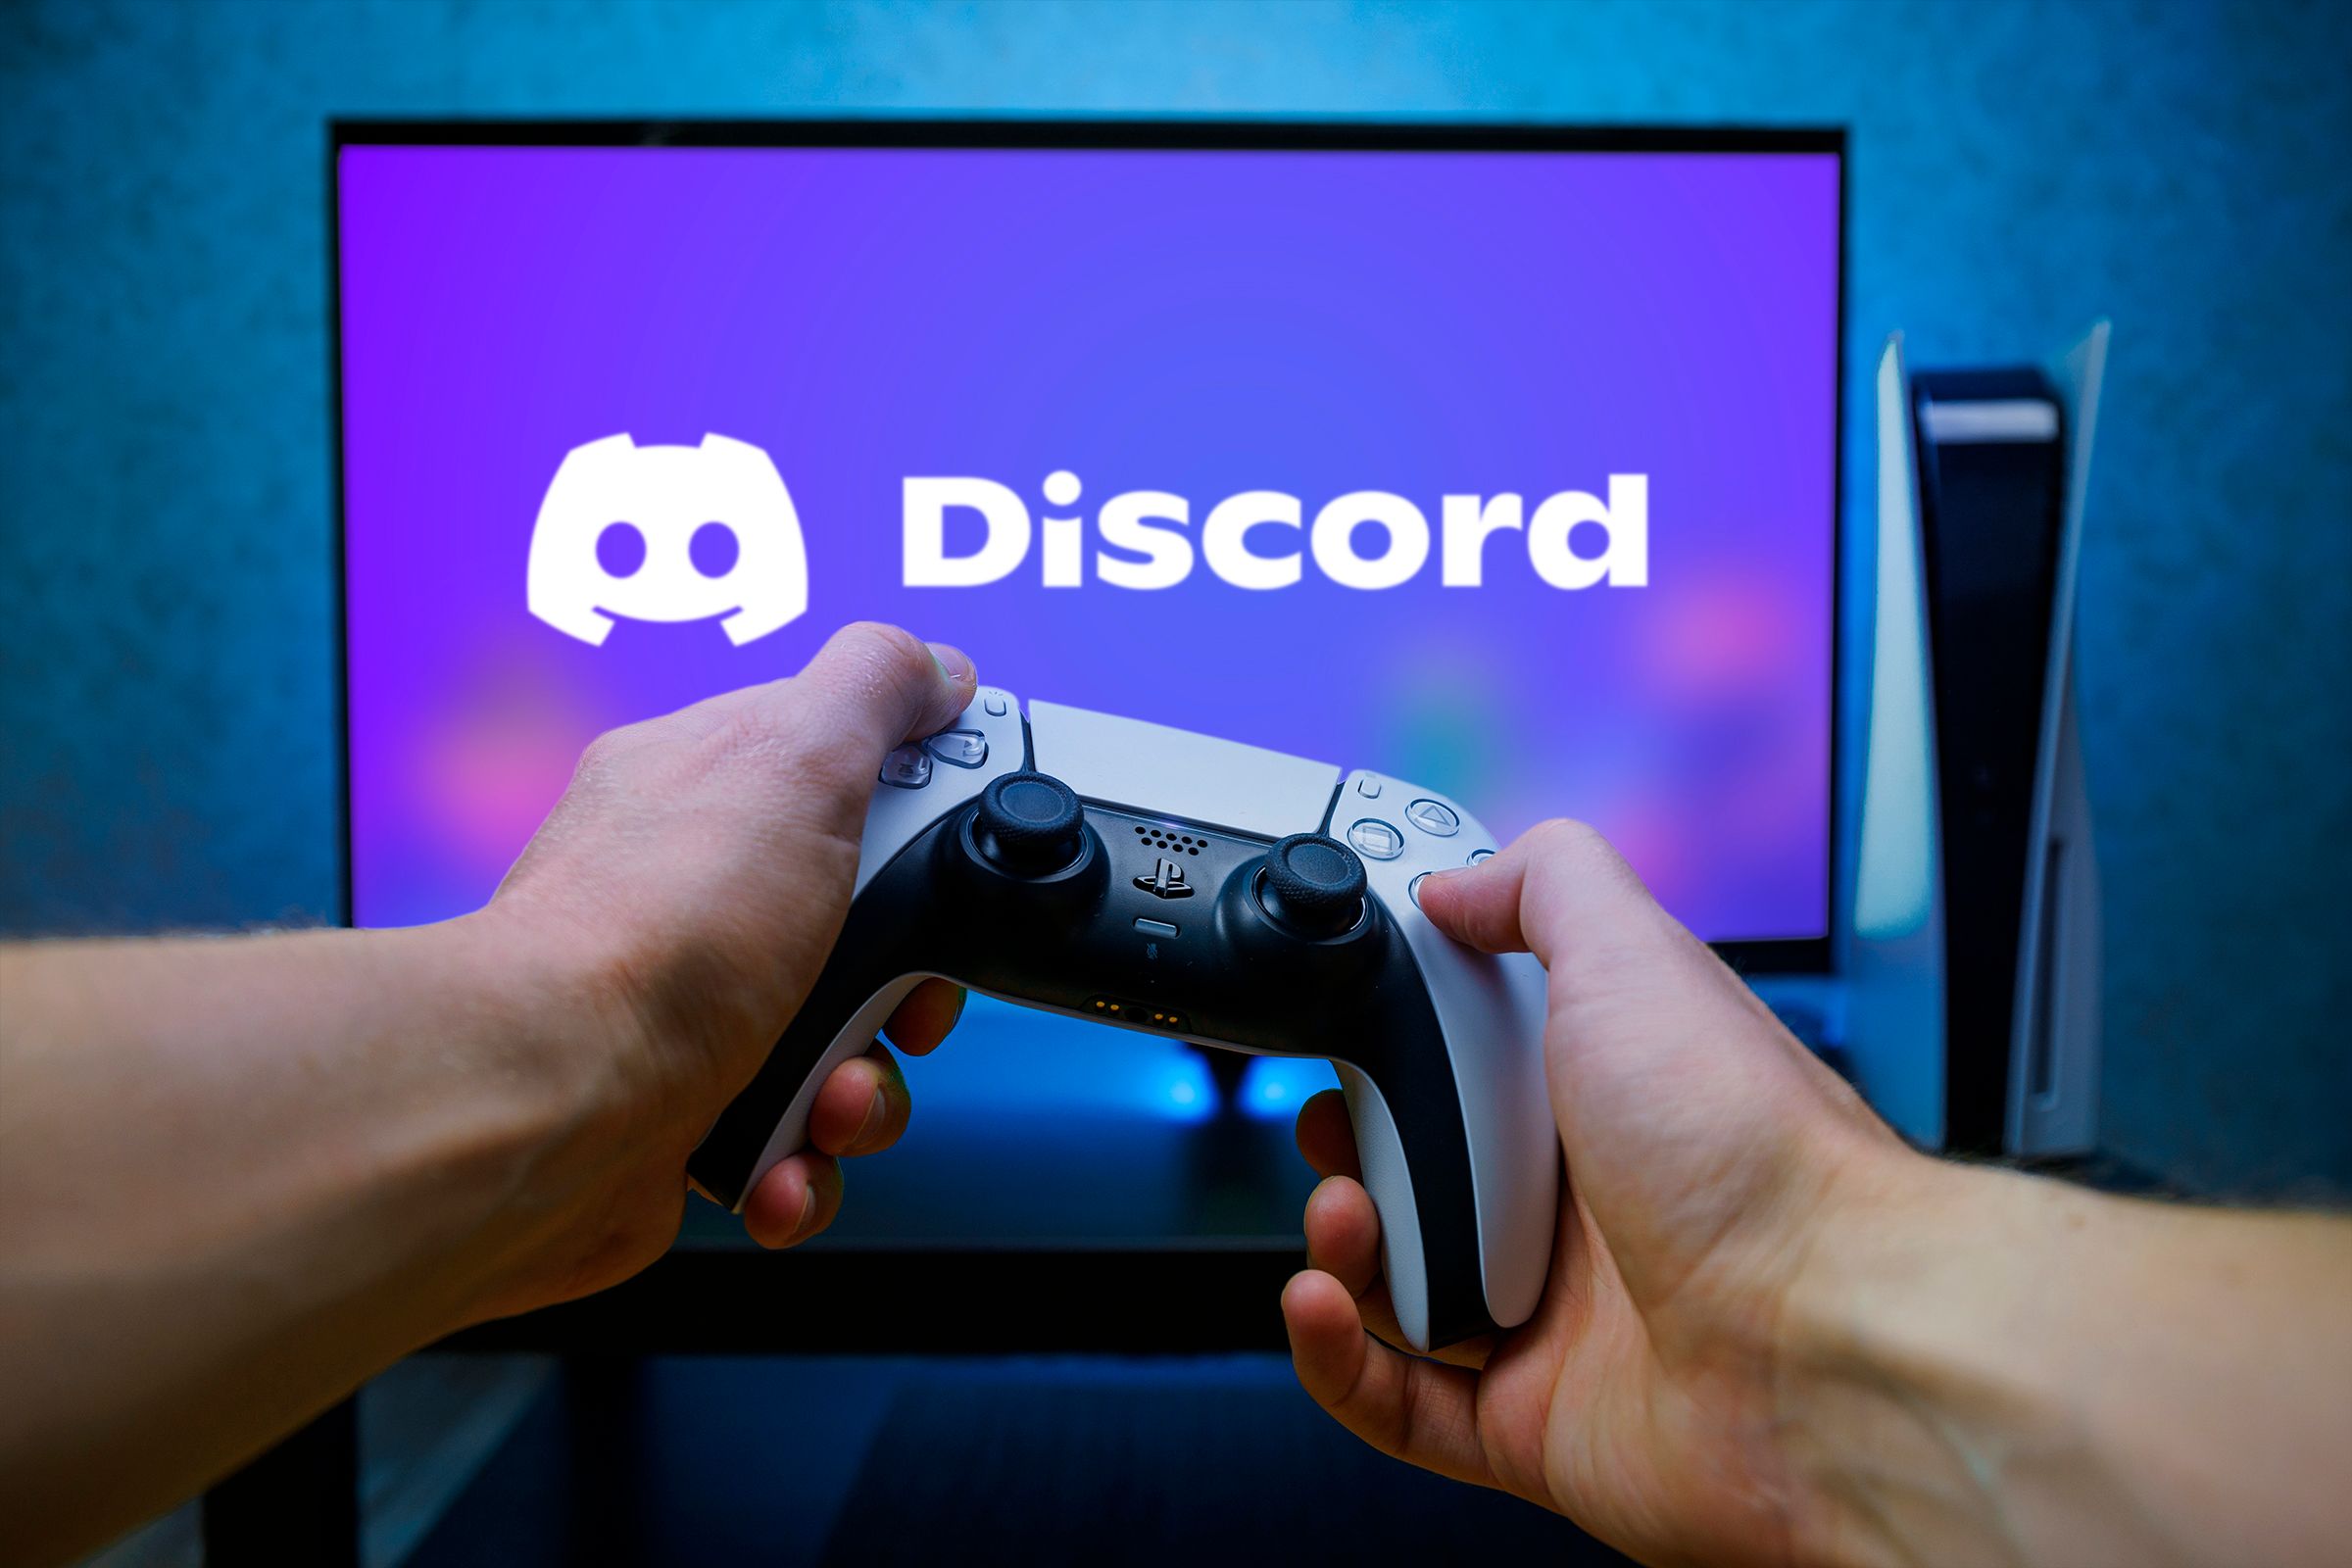 A person holding a PS5 DualSense controller and a TV in front with the Discord logo.